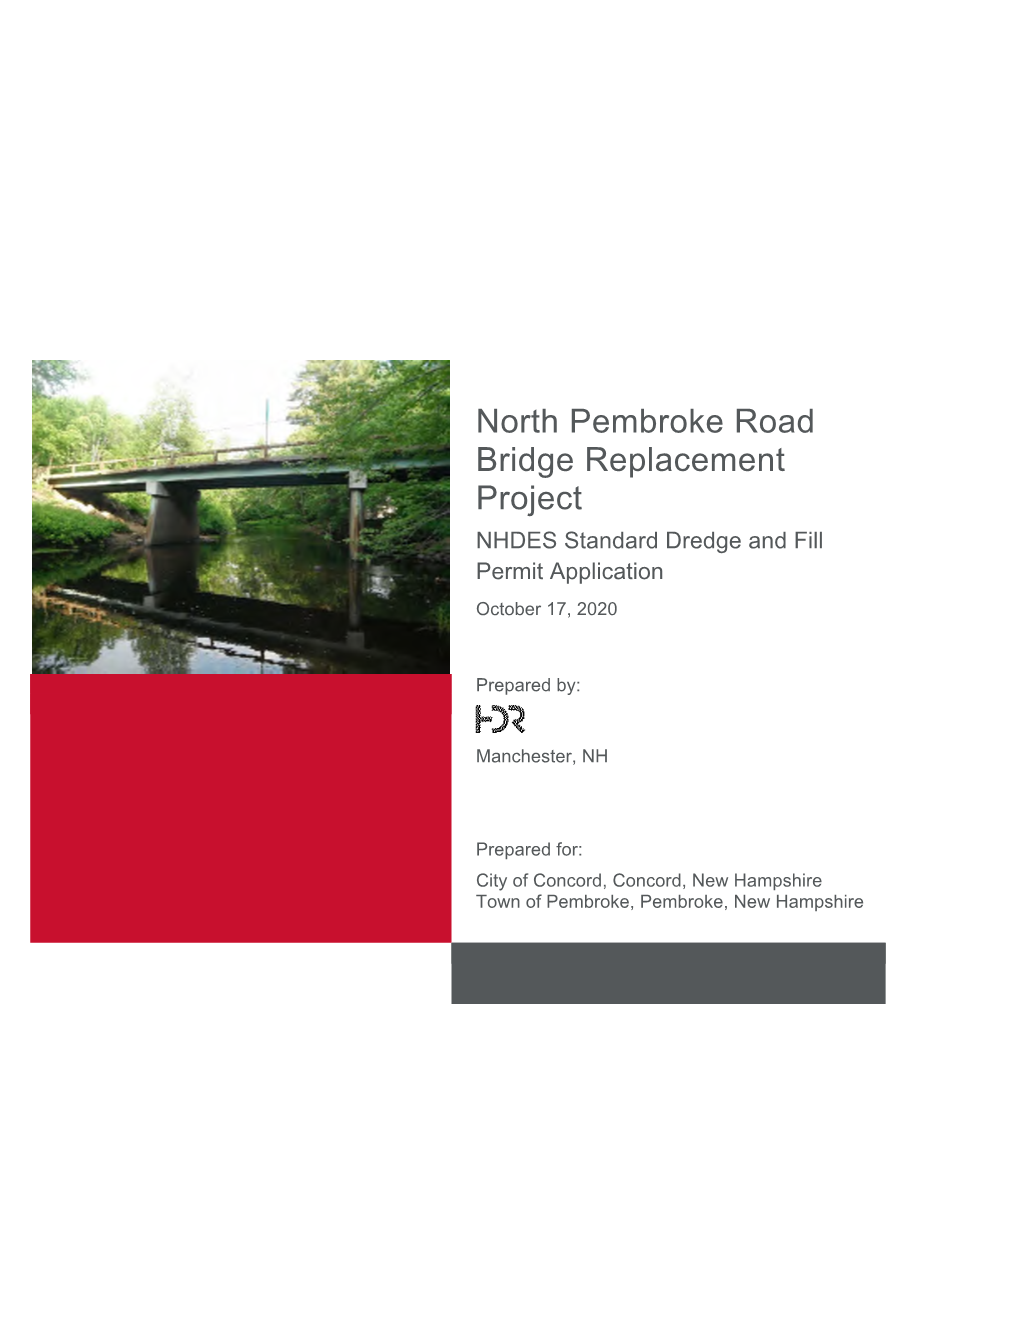 North Pembroke Road Bridge Replacement Project NHDES Standard Dredge and Fill Permit Application October 17, 2020